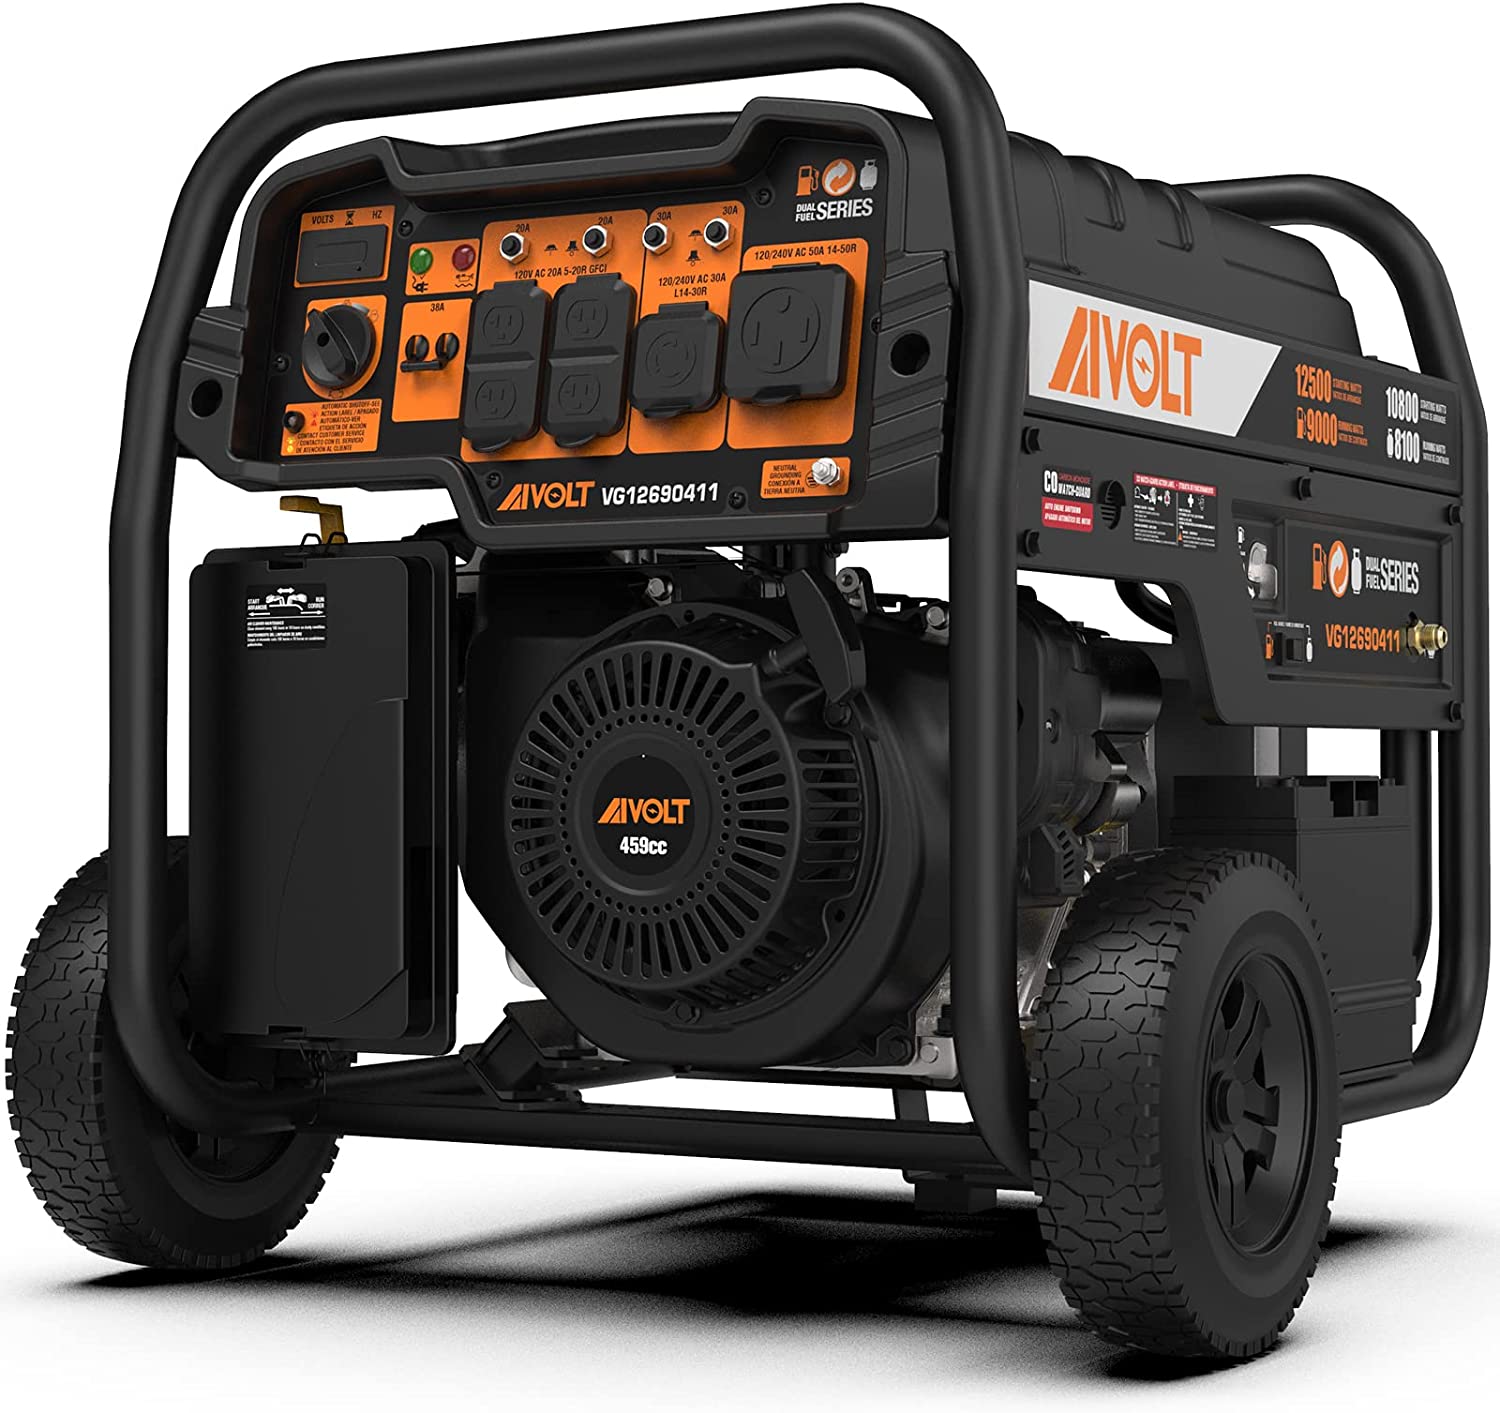 AIVOLT 12500 Watts Dual Fuel Generator – Portable Gas or Propane Powered Generator for Home Use Electric Start Generator for Power Outages, CO Sensor, 50 State Approved